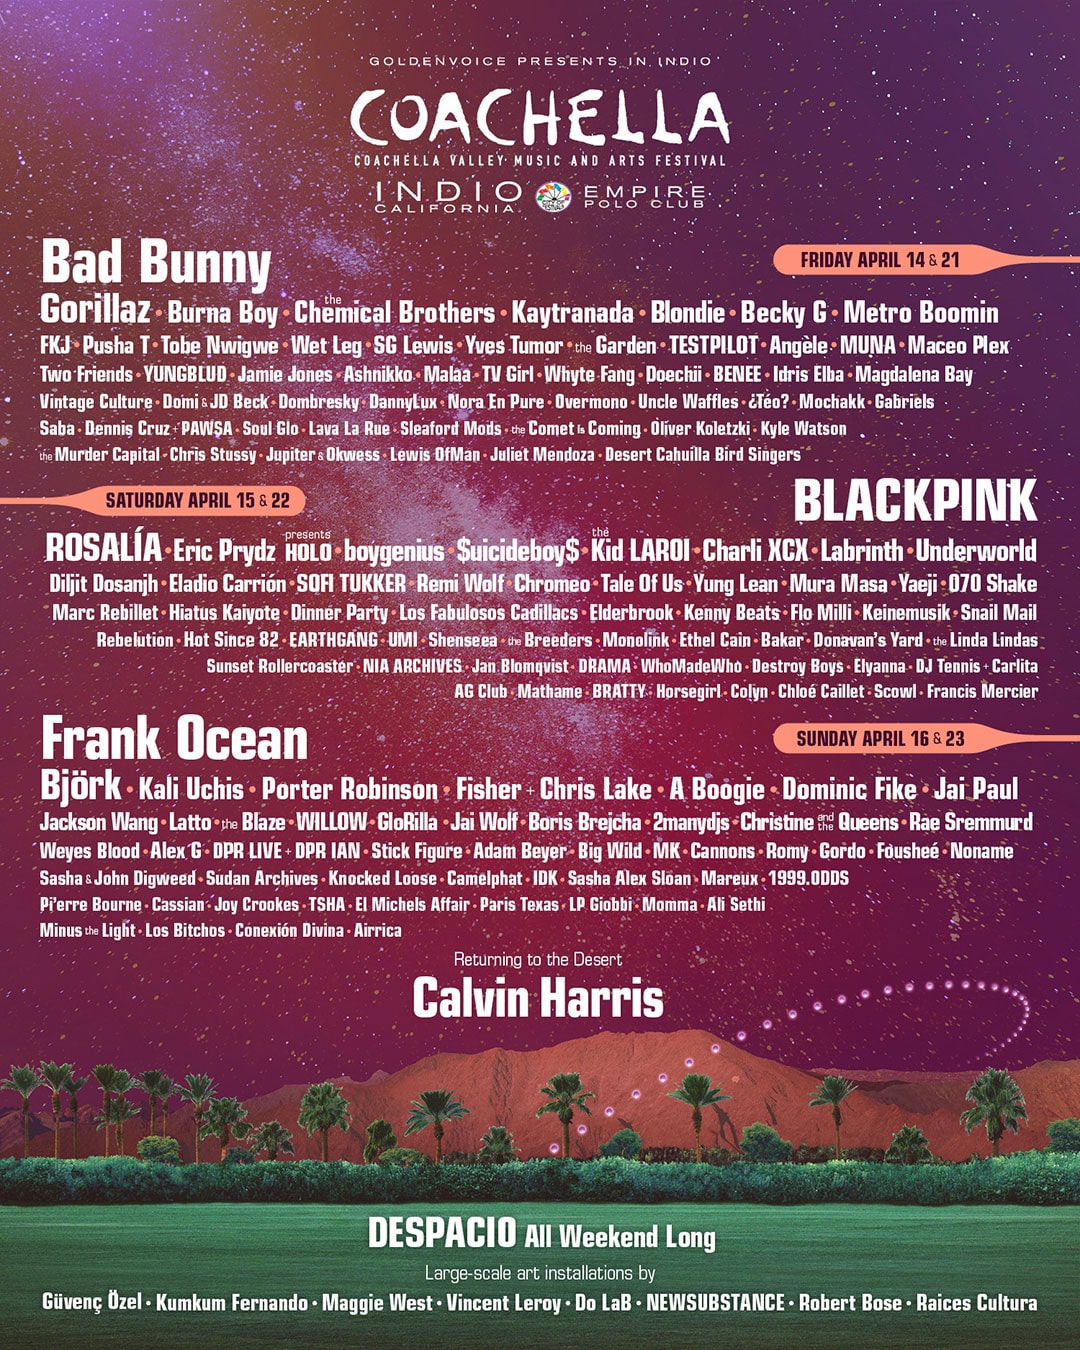 BLACKPINK was a headliner for the Coachella 2023 lineup, which also included Jackson Wang, DPR LIVE + DPR IAN